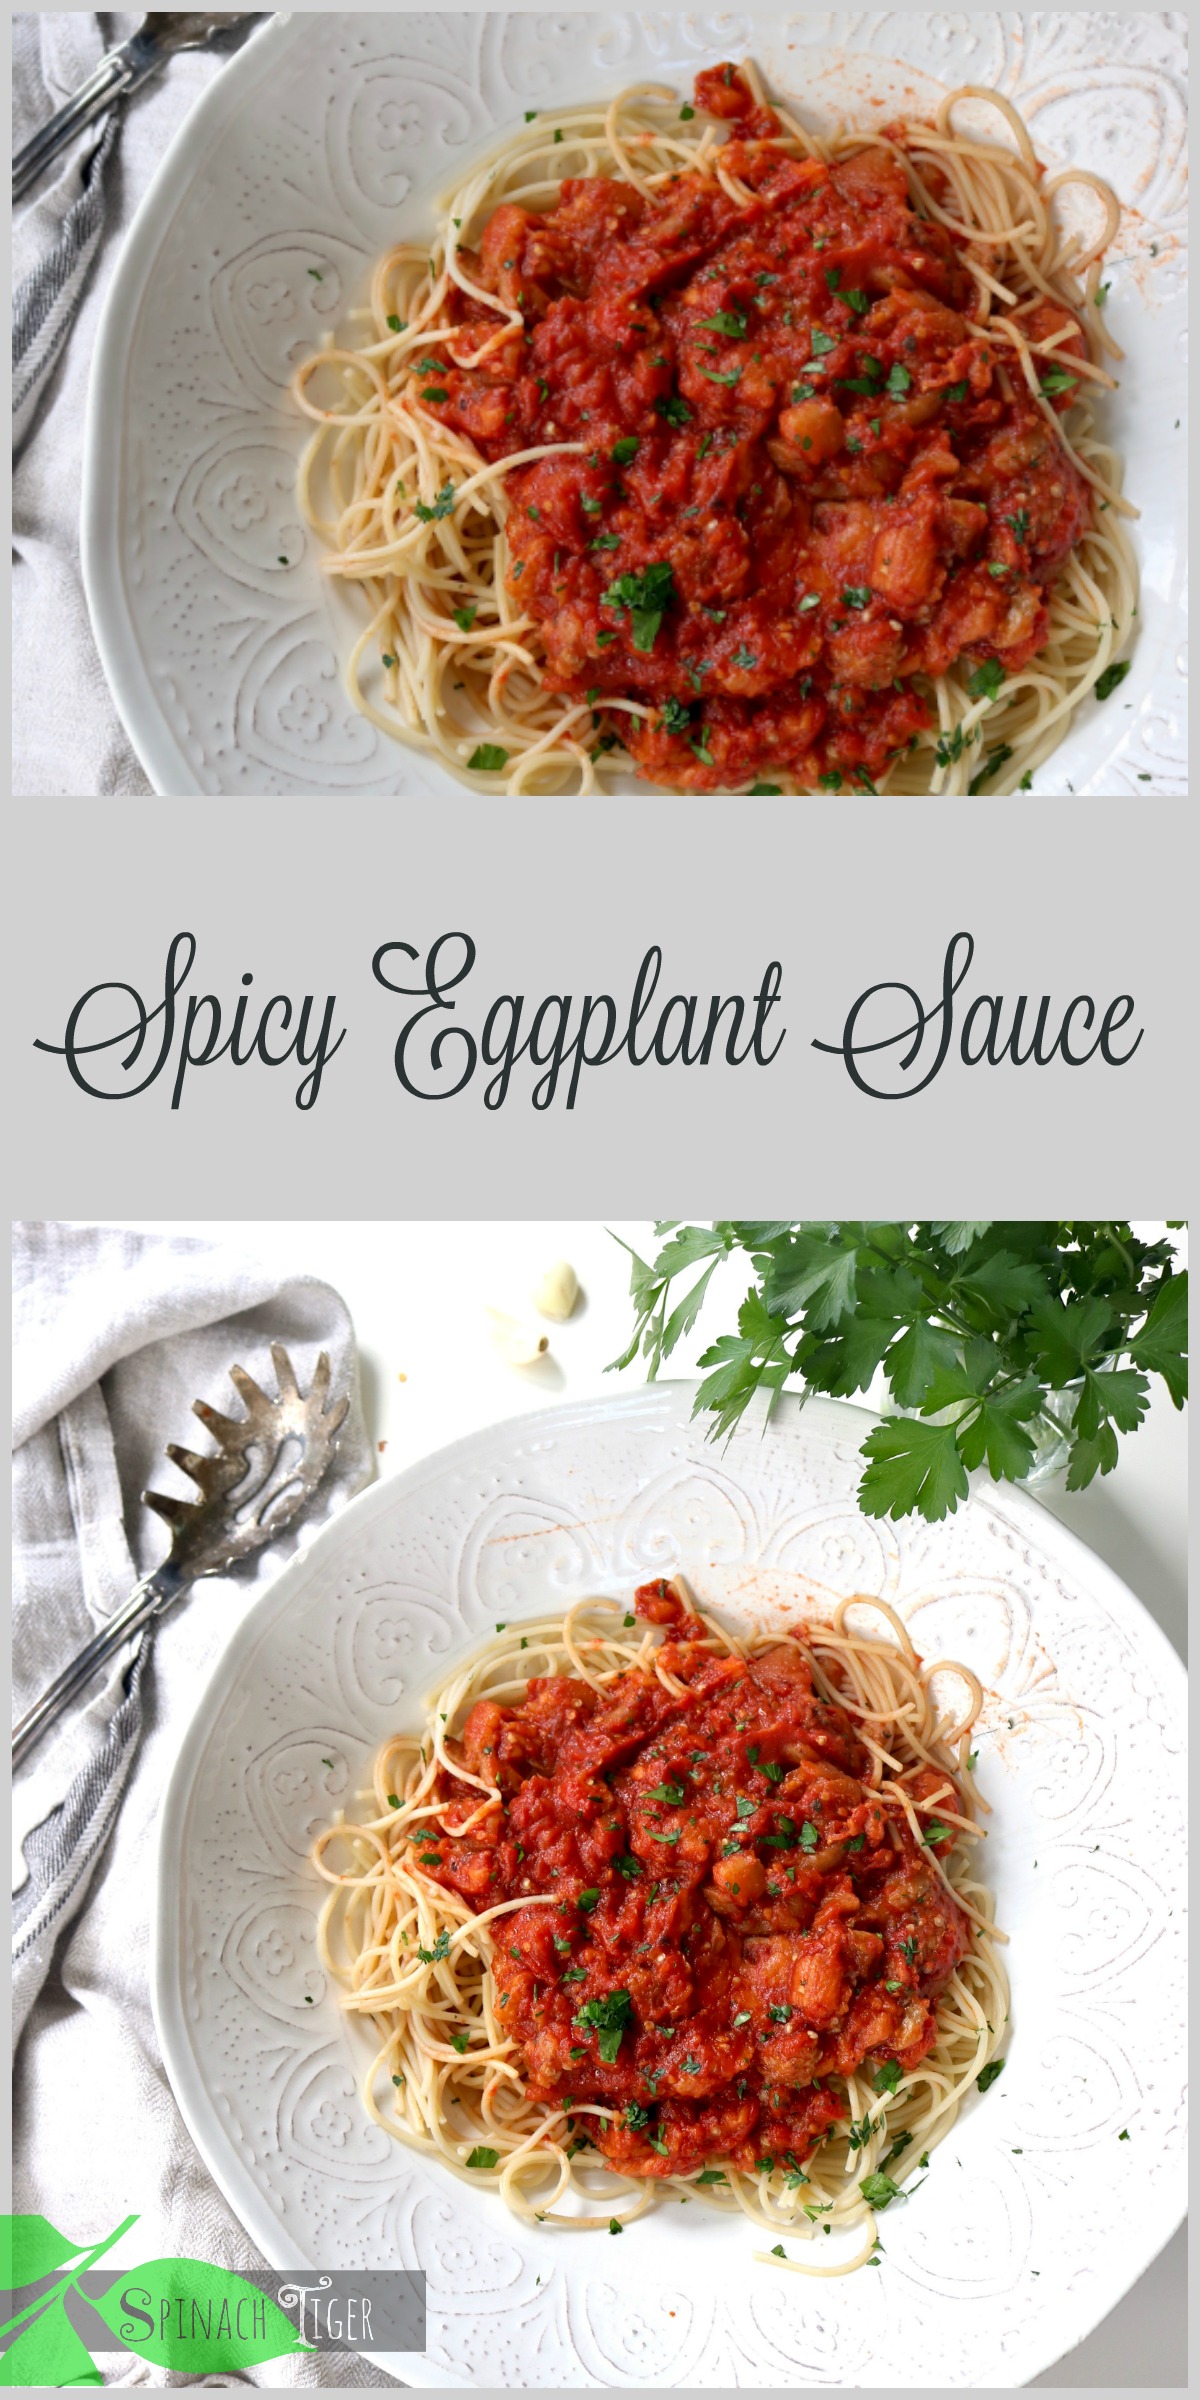 Spaghetti with Spicy Eggplant Sauce from Spinach Tiger